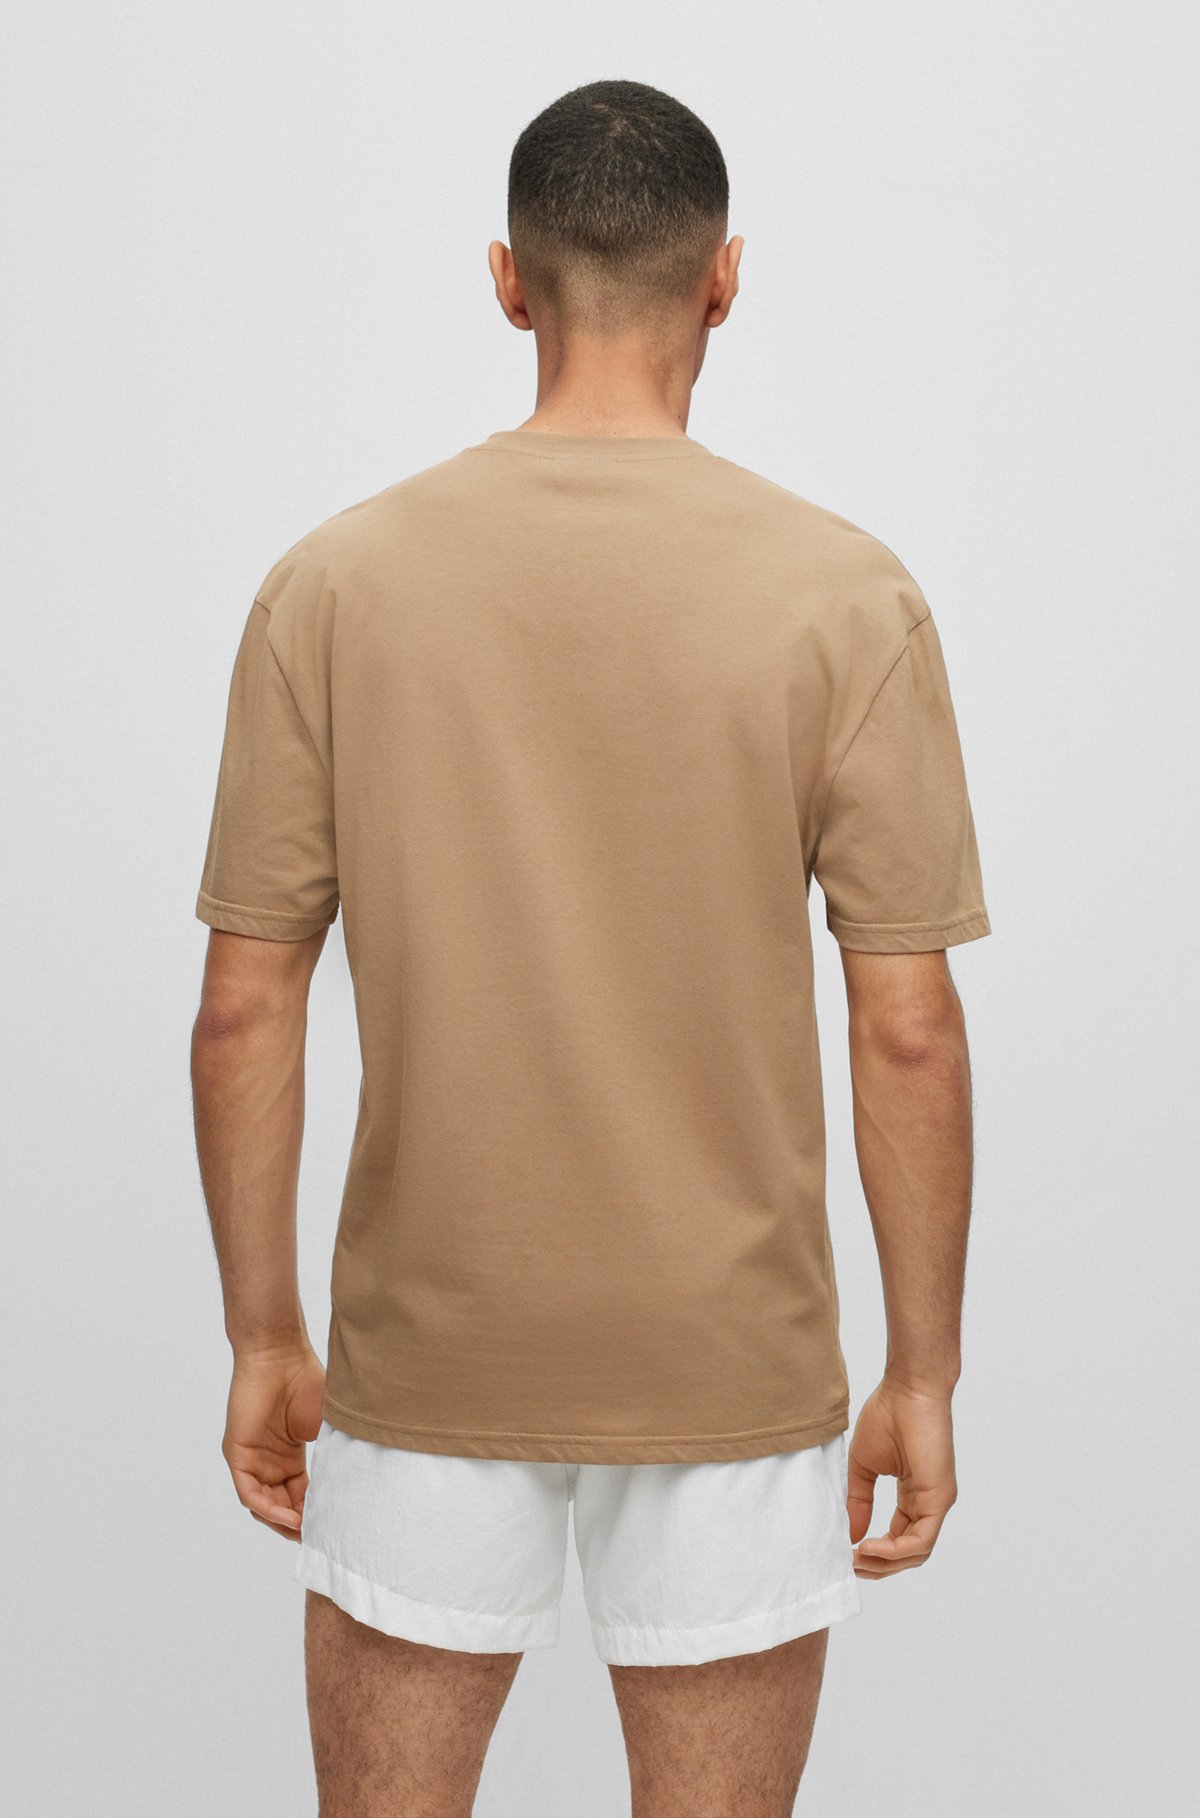 Relaxed-fit T-shirt in cotton with vertical logo print, Light Brown